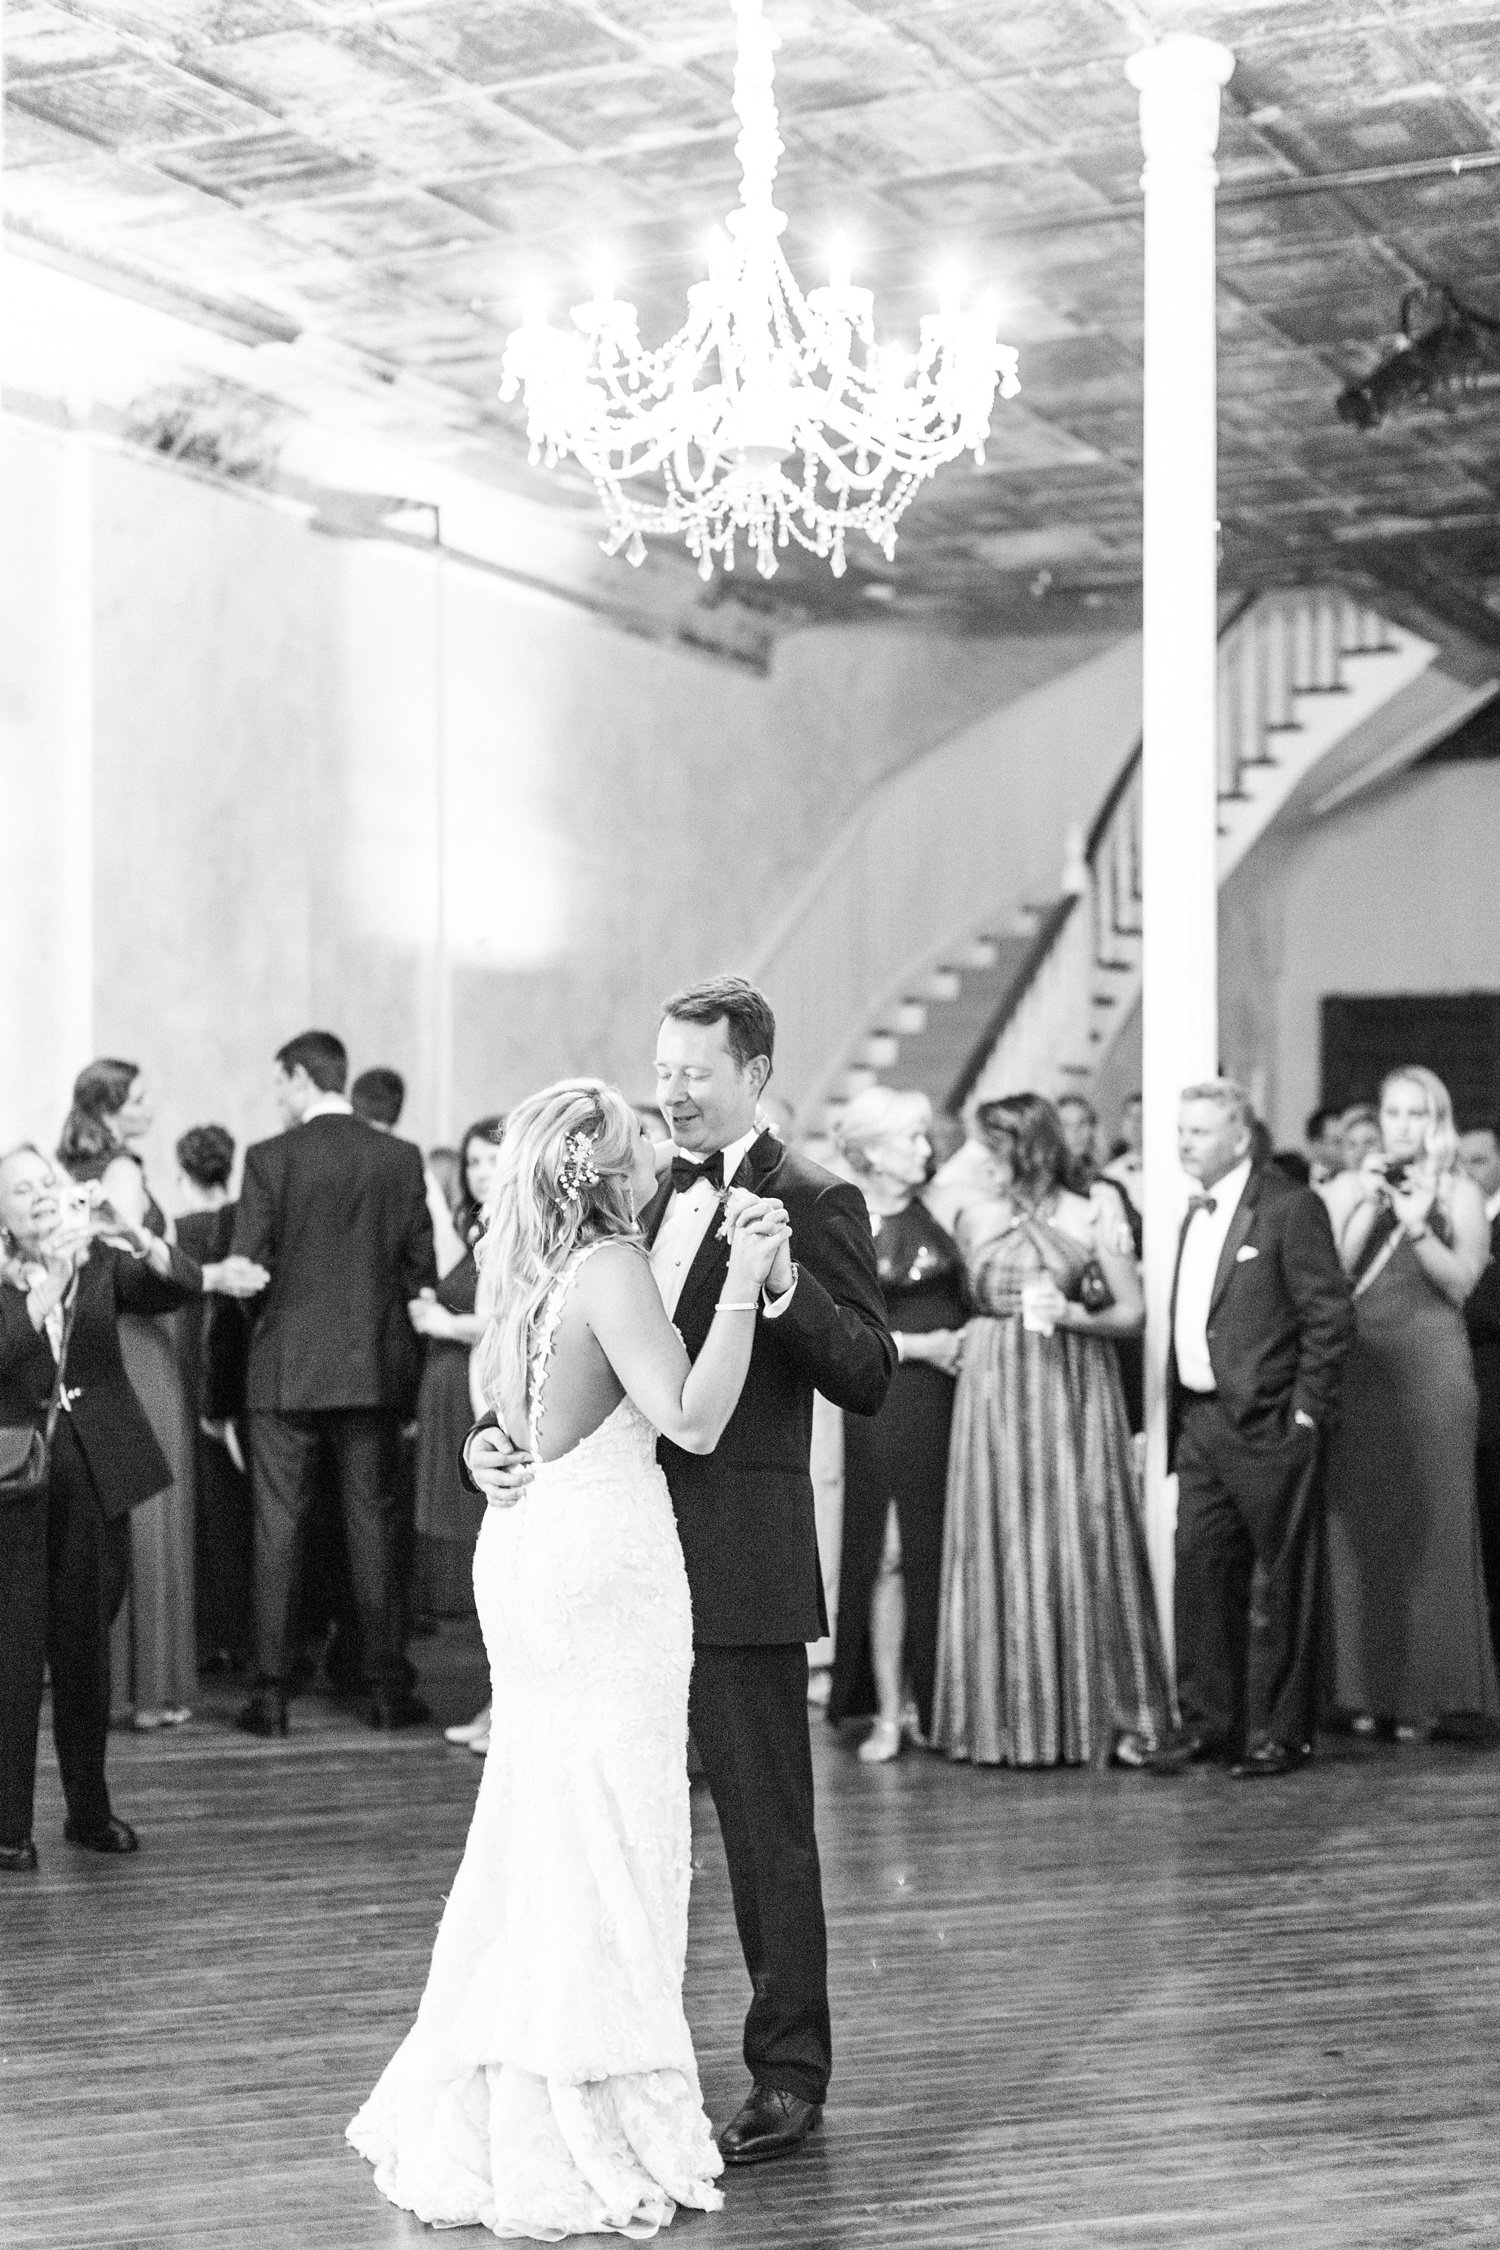 Bride and groom dancing first dance in Grand Salon of Excelsior in black and white